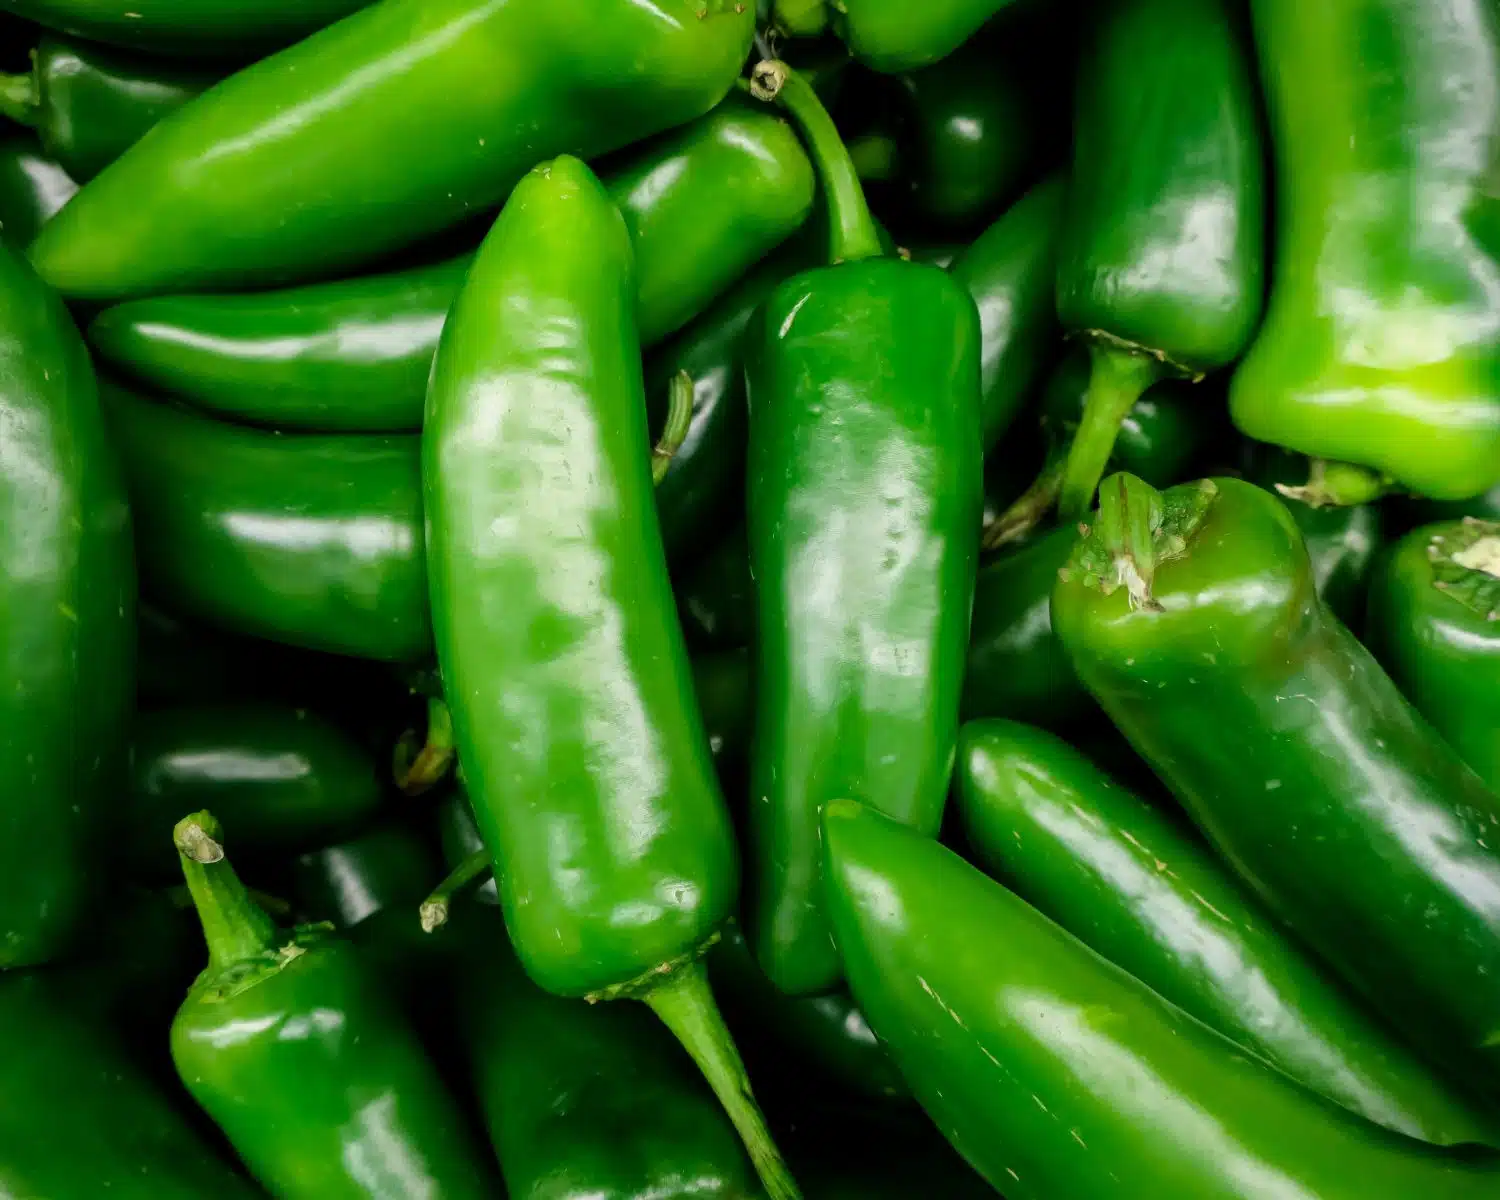 Looking down on a bunch of green jalapeños.